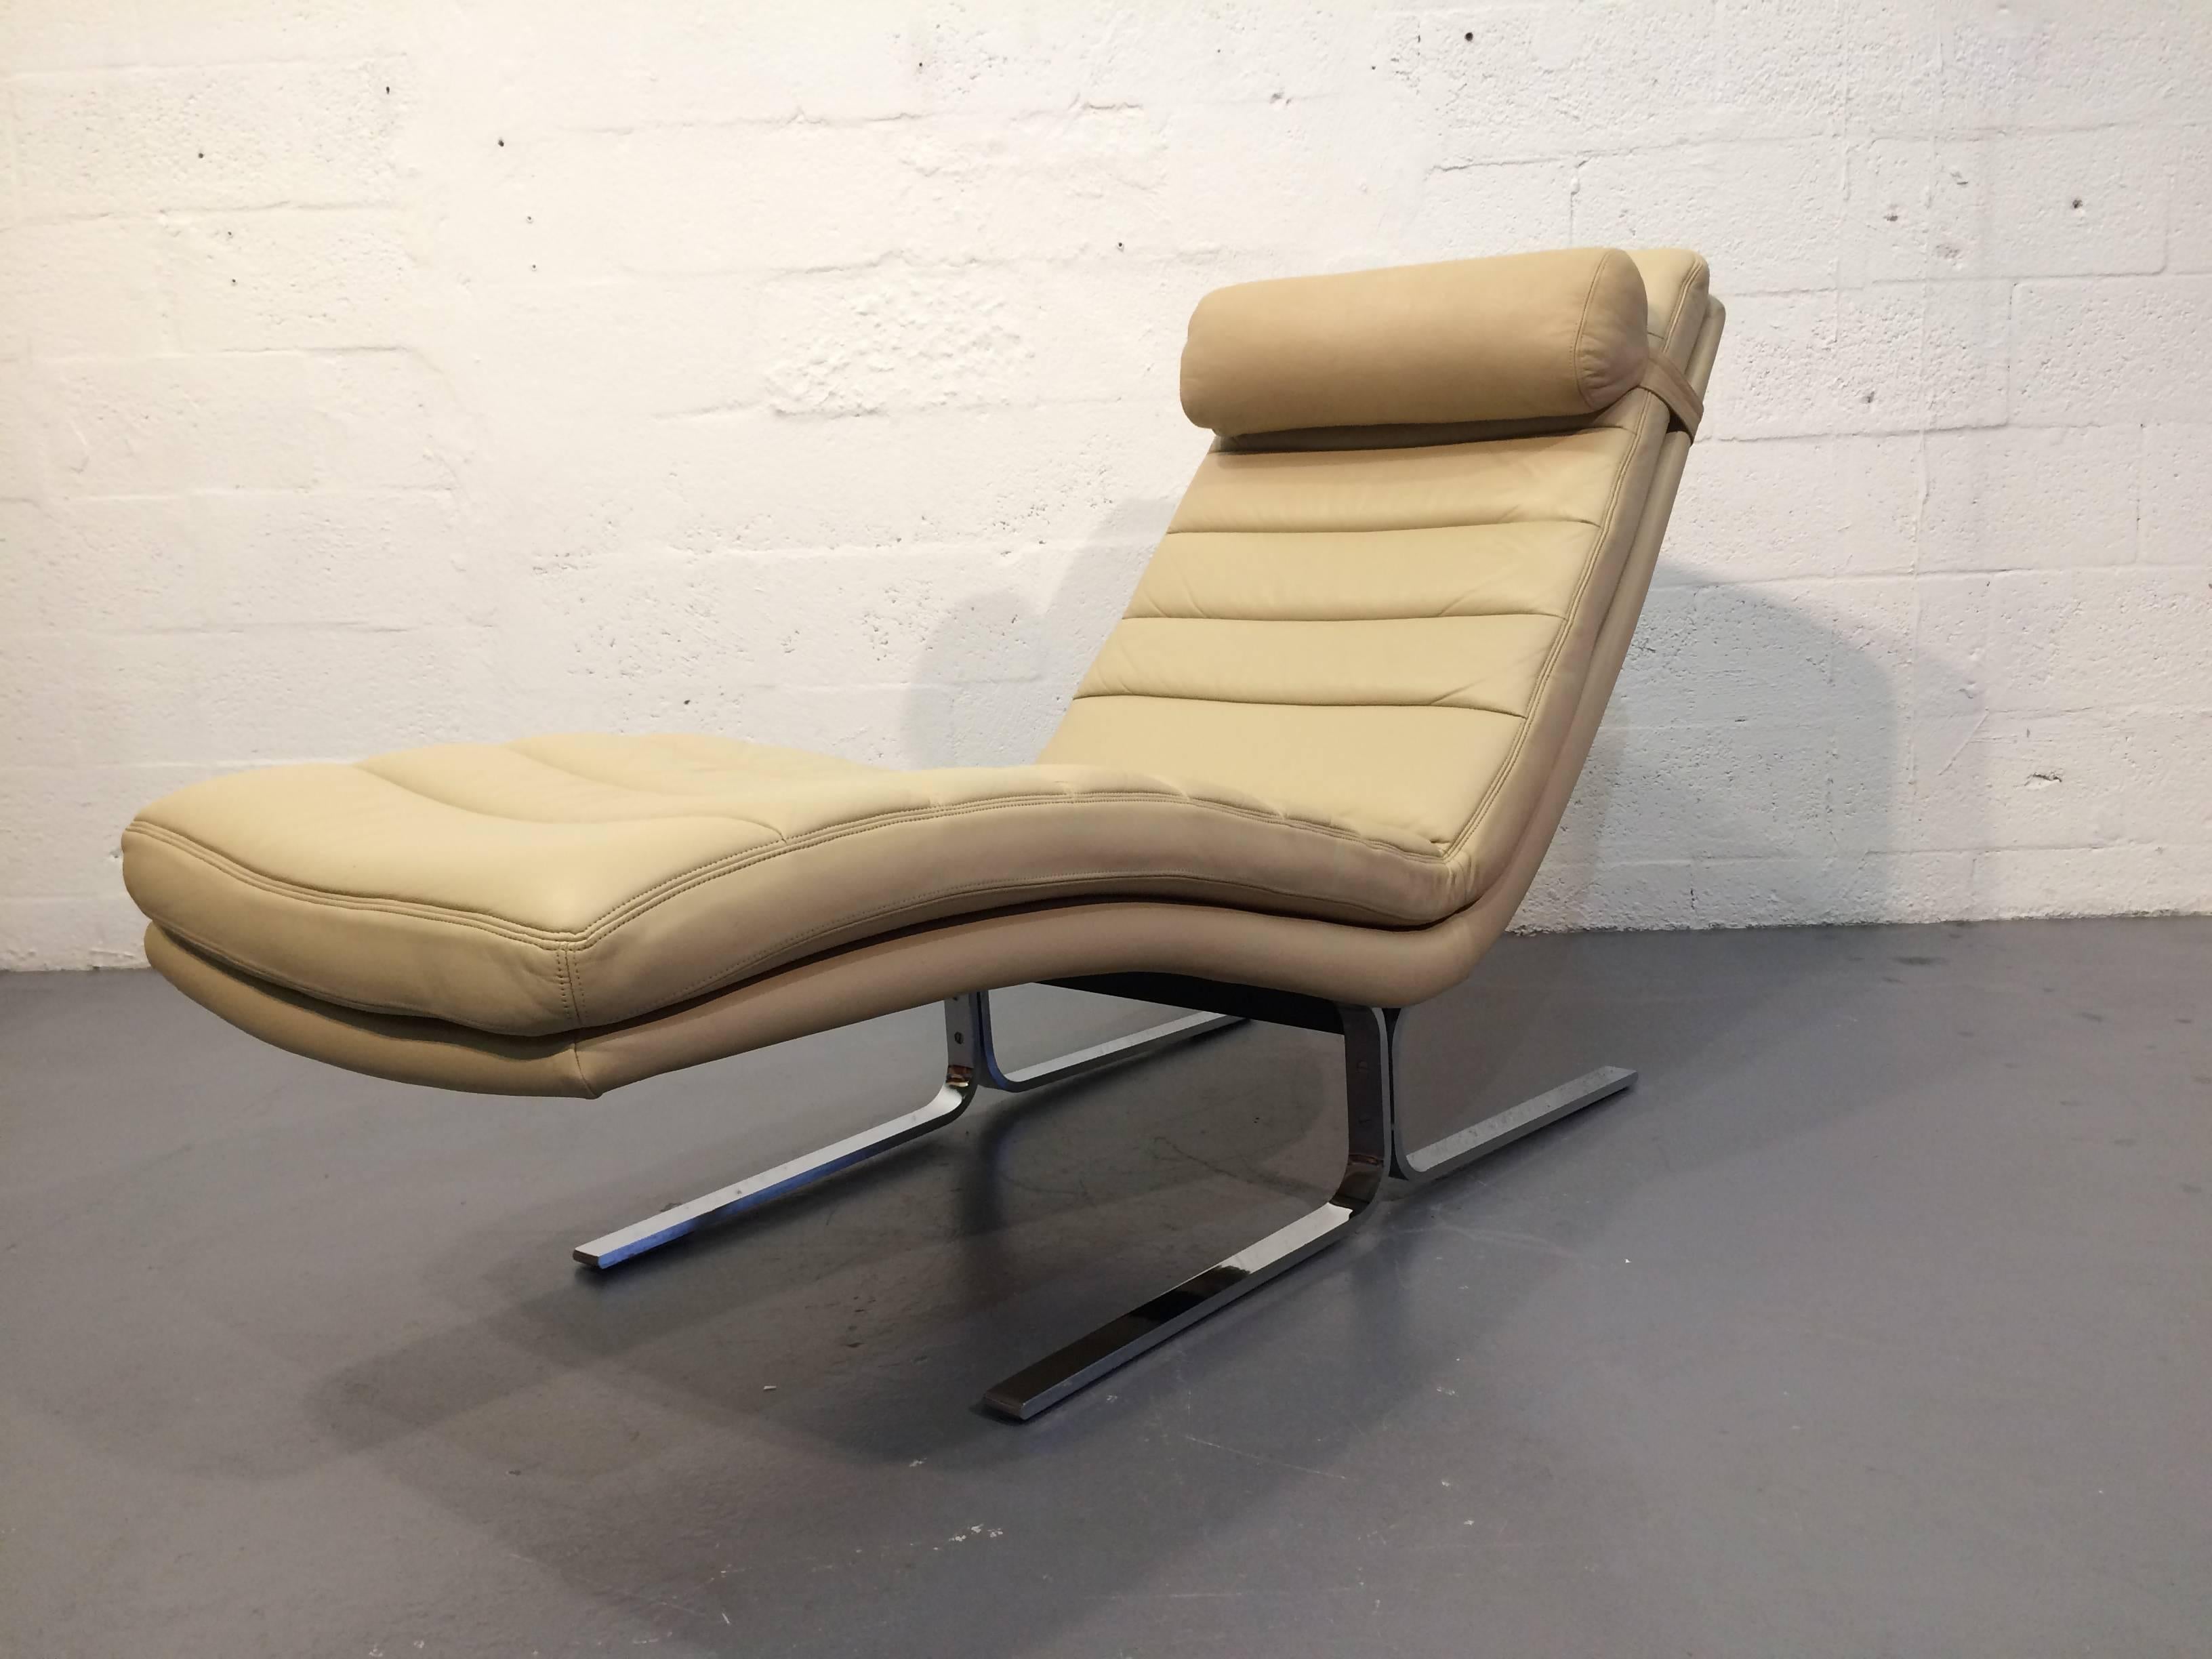 Very comfortable and cool chaise designed by Harvey Probber.